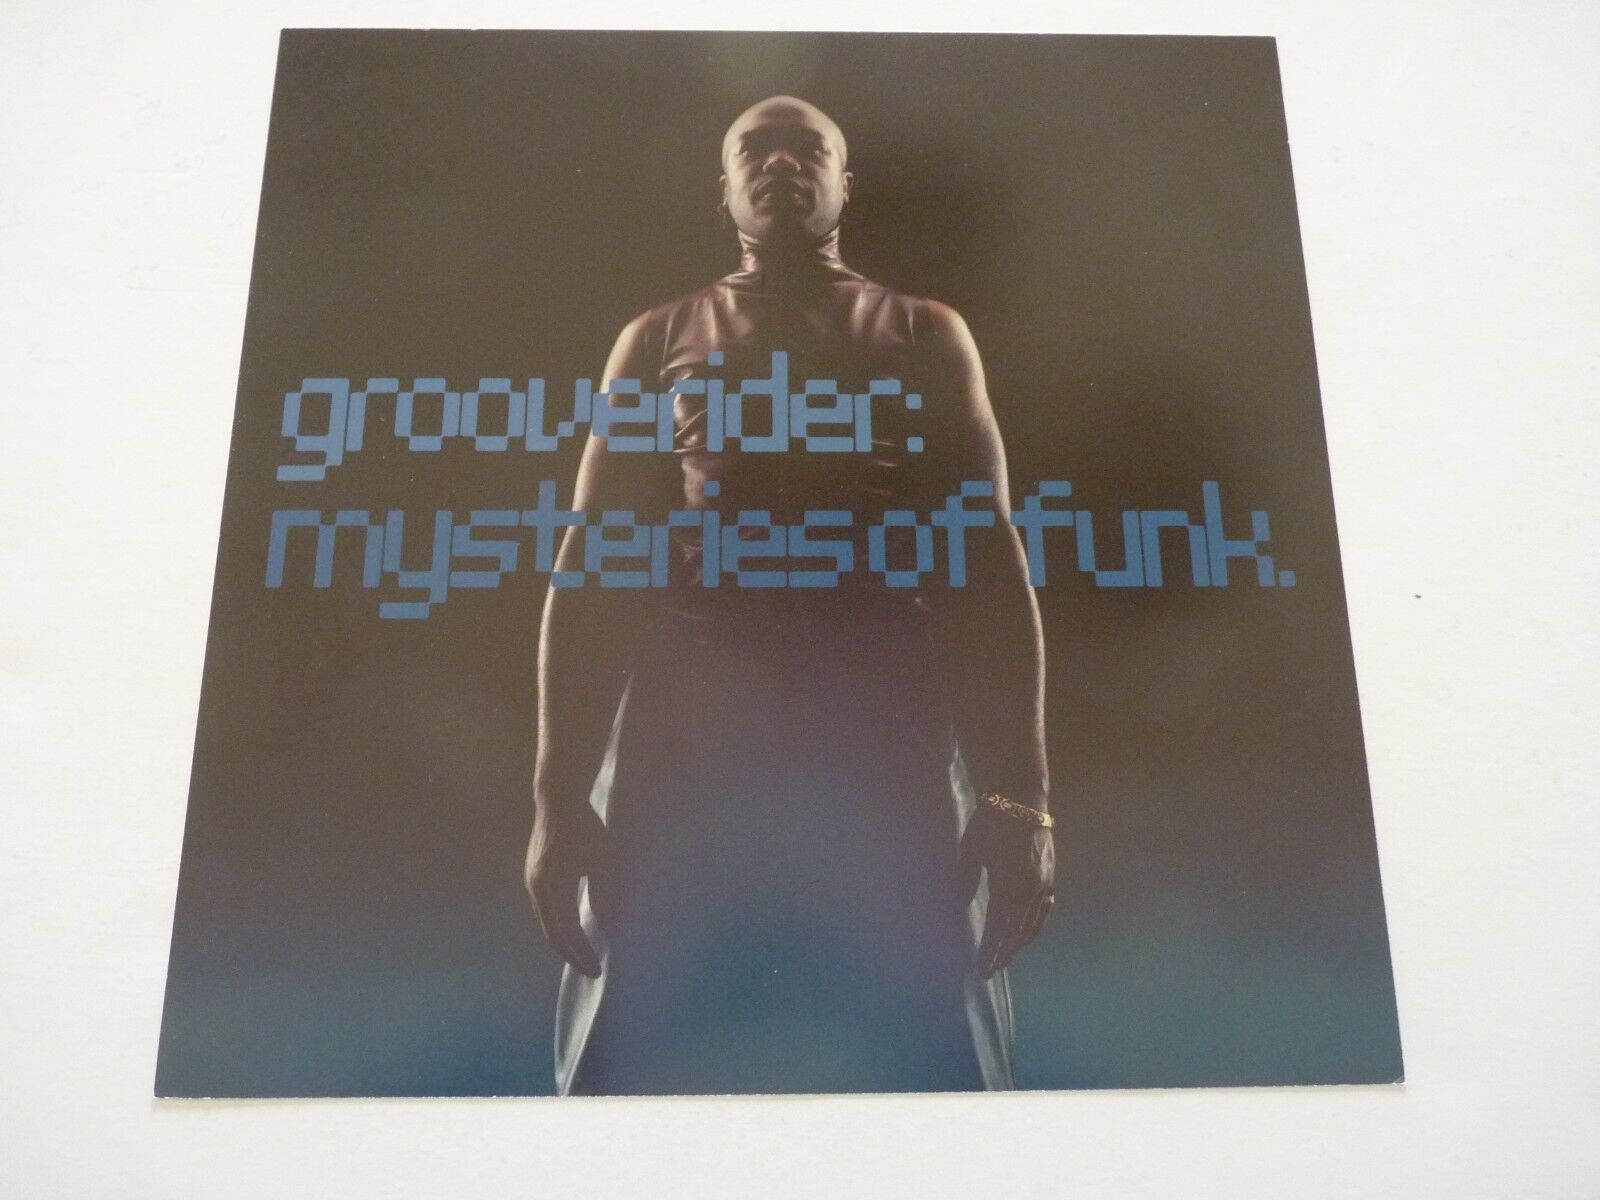 Grooverider Mysteries of Funk 1998 Promo LP Record Photo Poster painting Flat 12x12 Poster